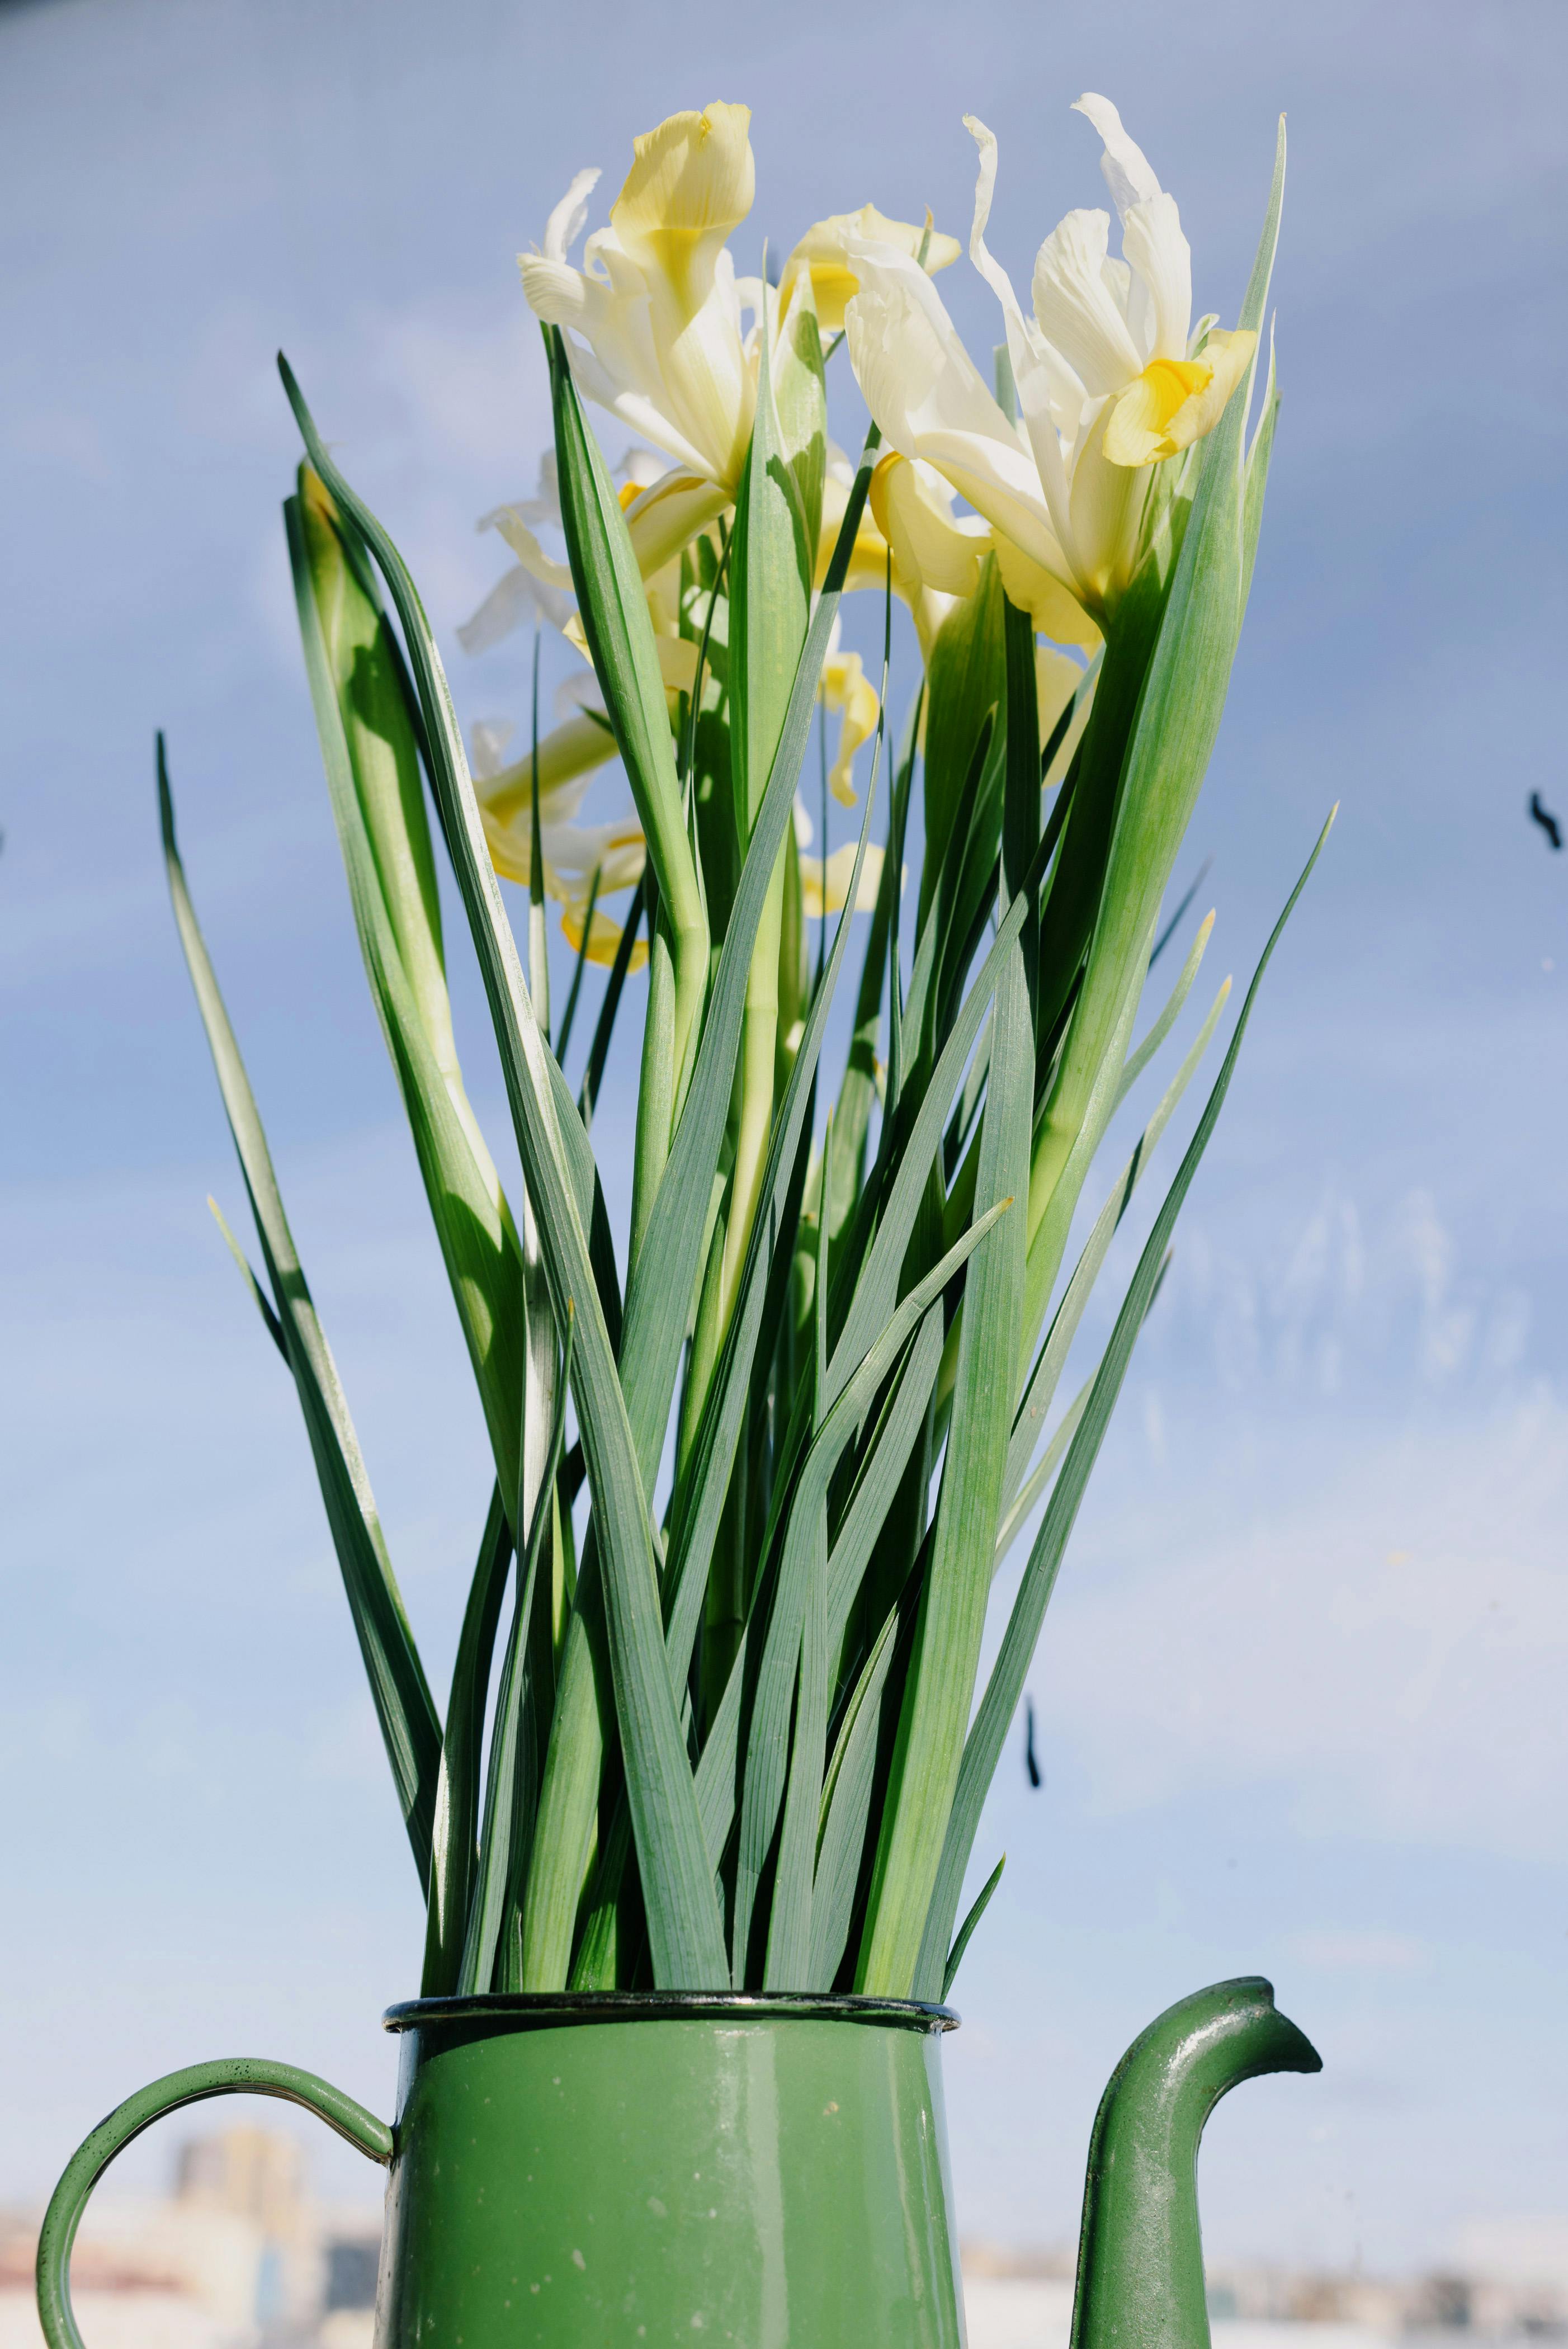 bouquet of fresh delicate daffodils on blue sky background